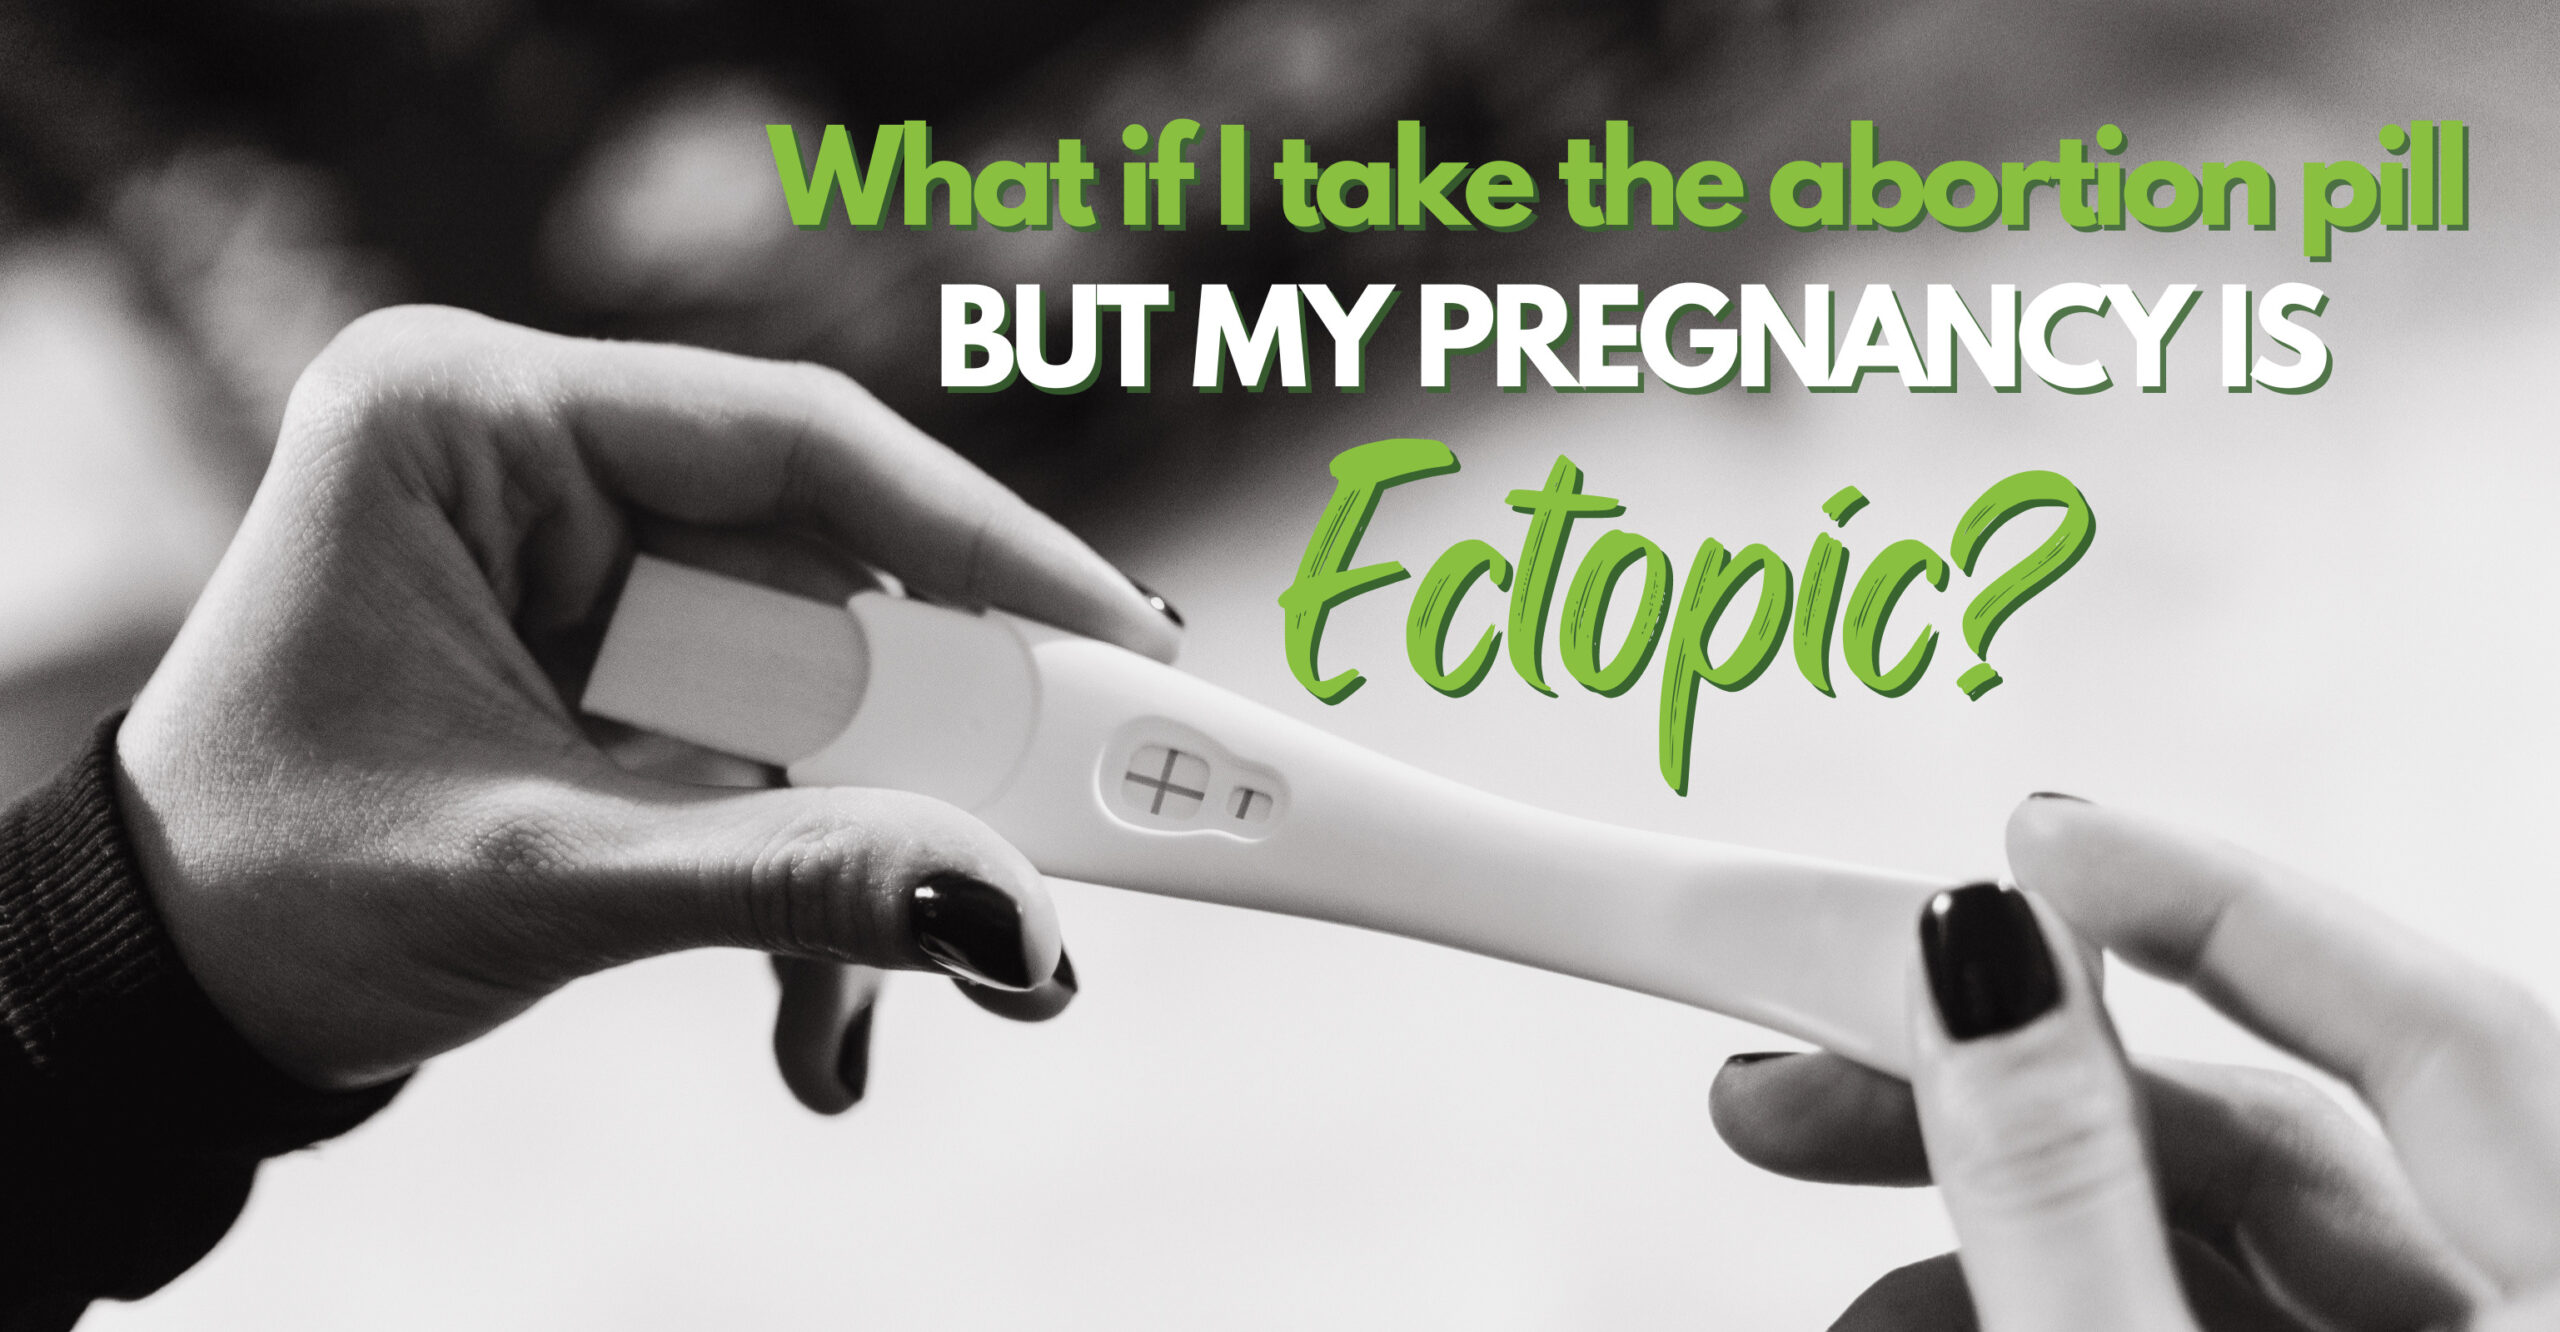 What if I take the abortion pill but my pregnancy is ectopic?